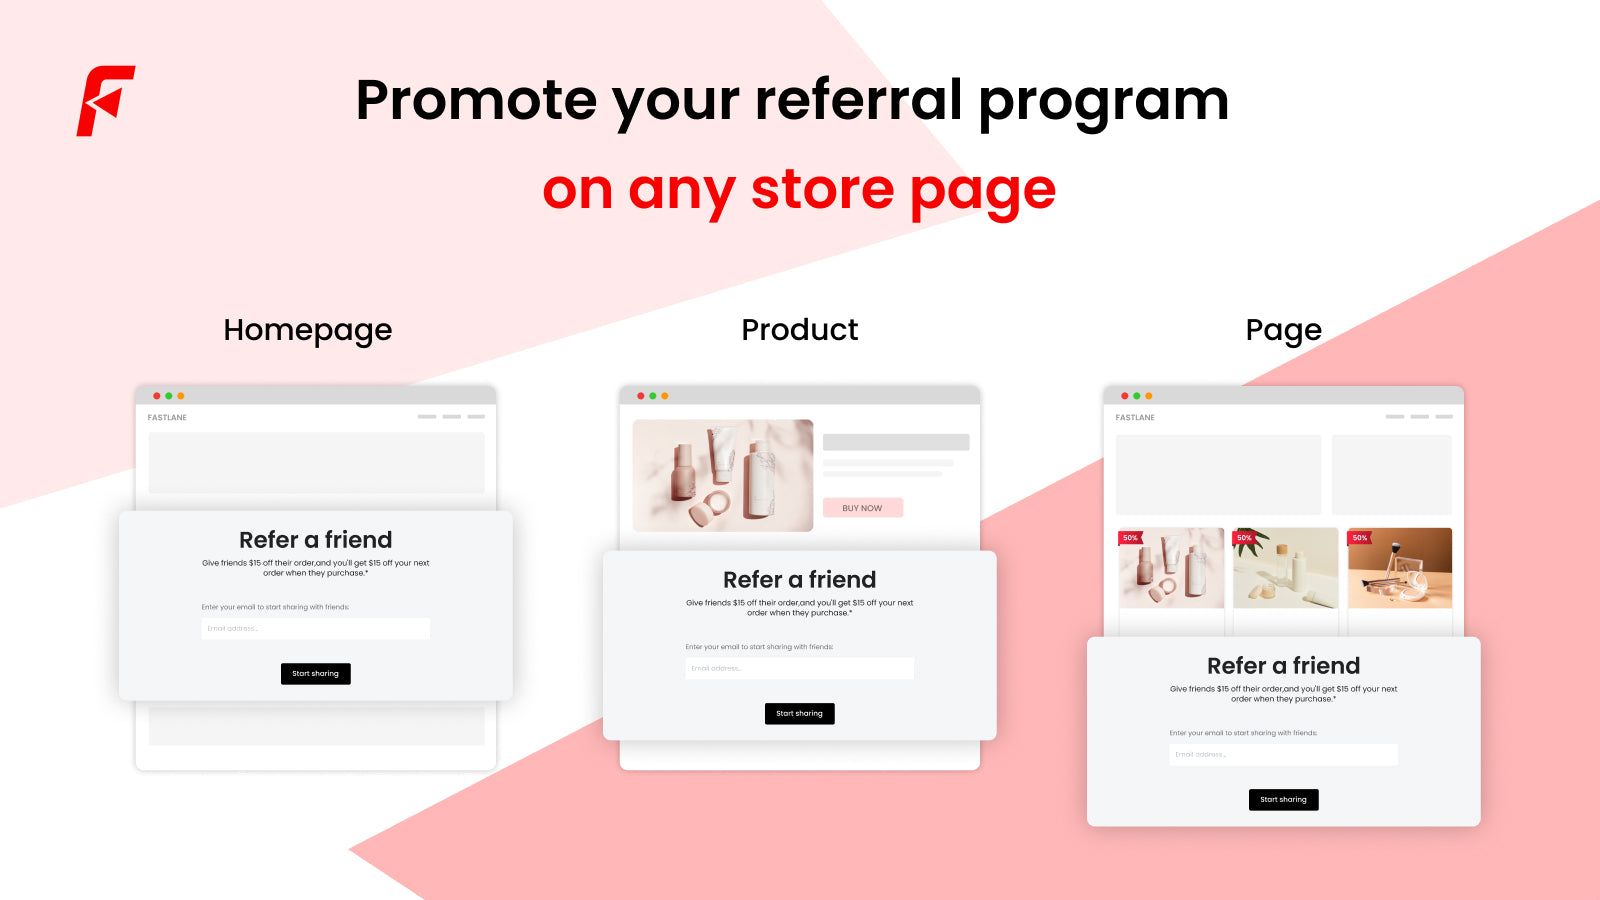 Promote your referral program on any store page